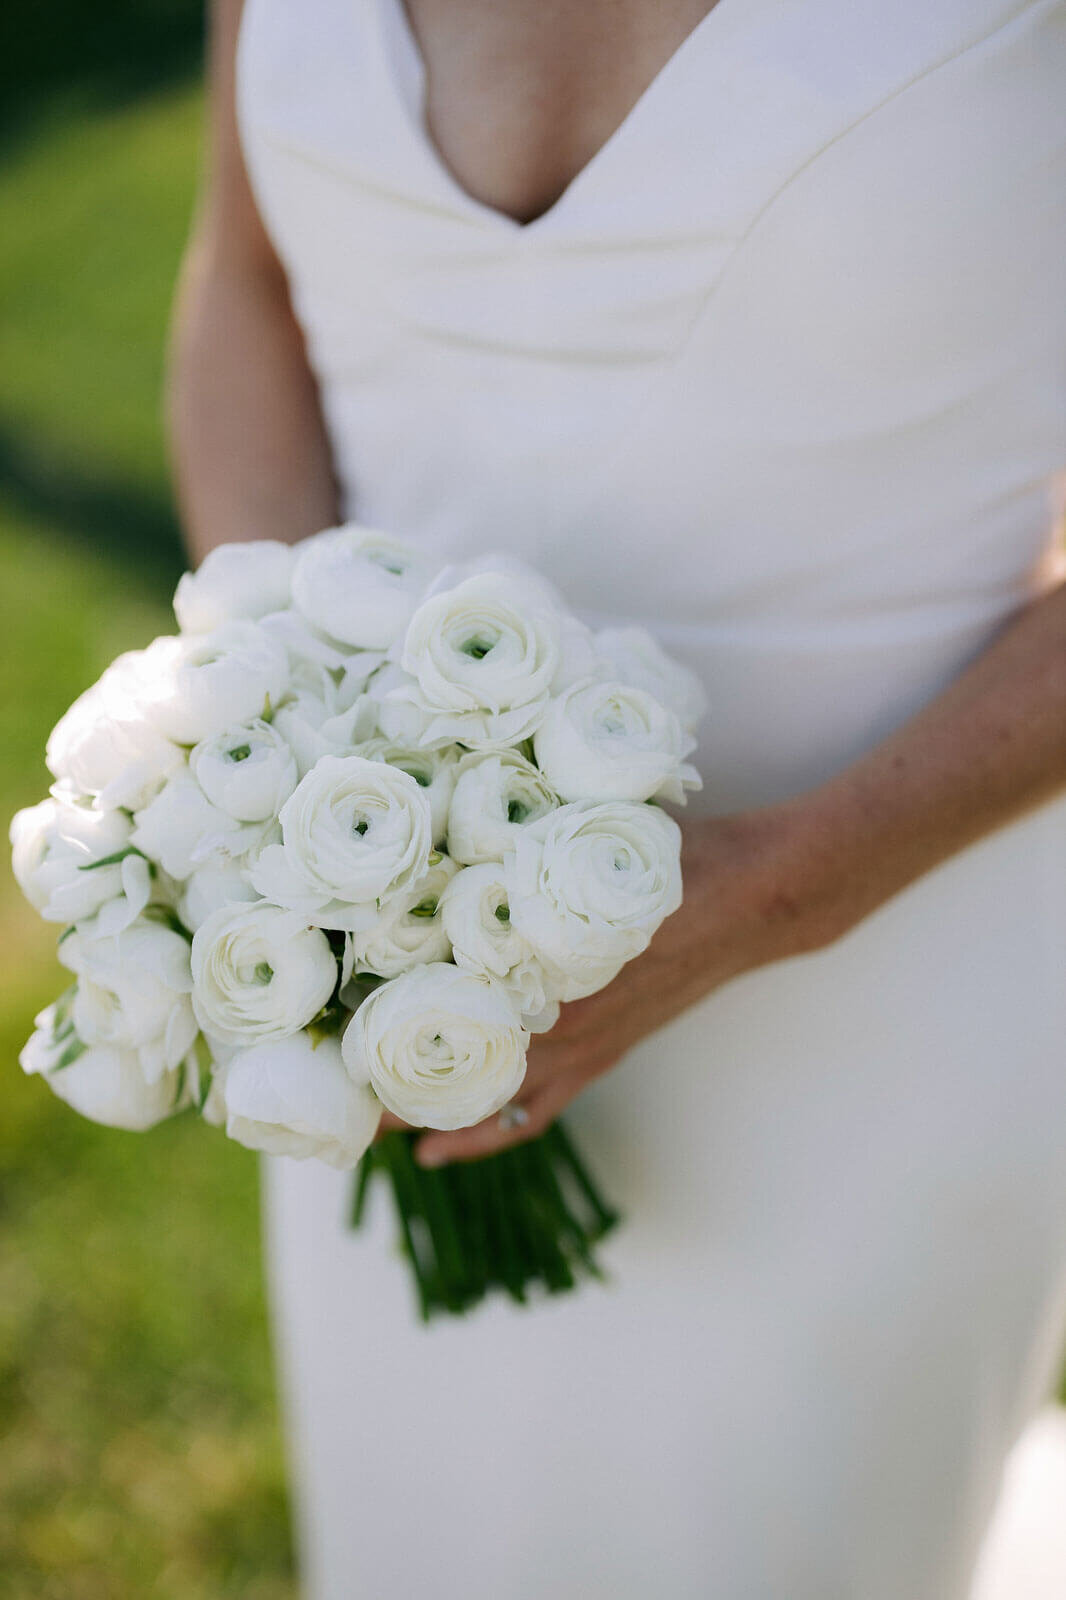 Close-up view of a bouquet of white flowers held by the bride outside Wianno Club, Cape Cod, MA.